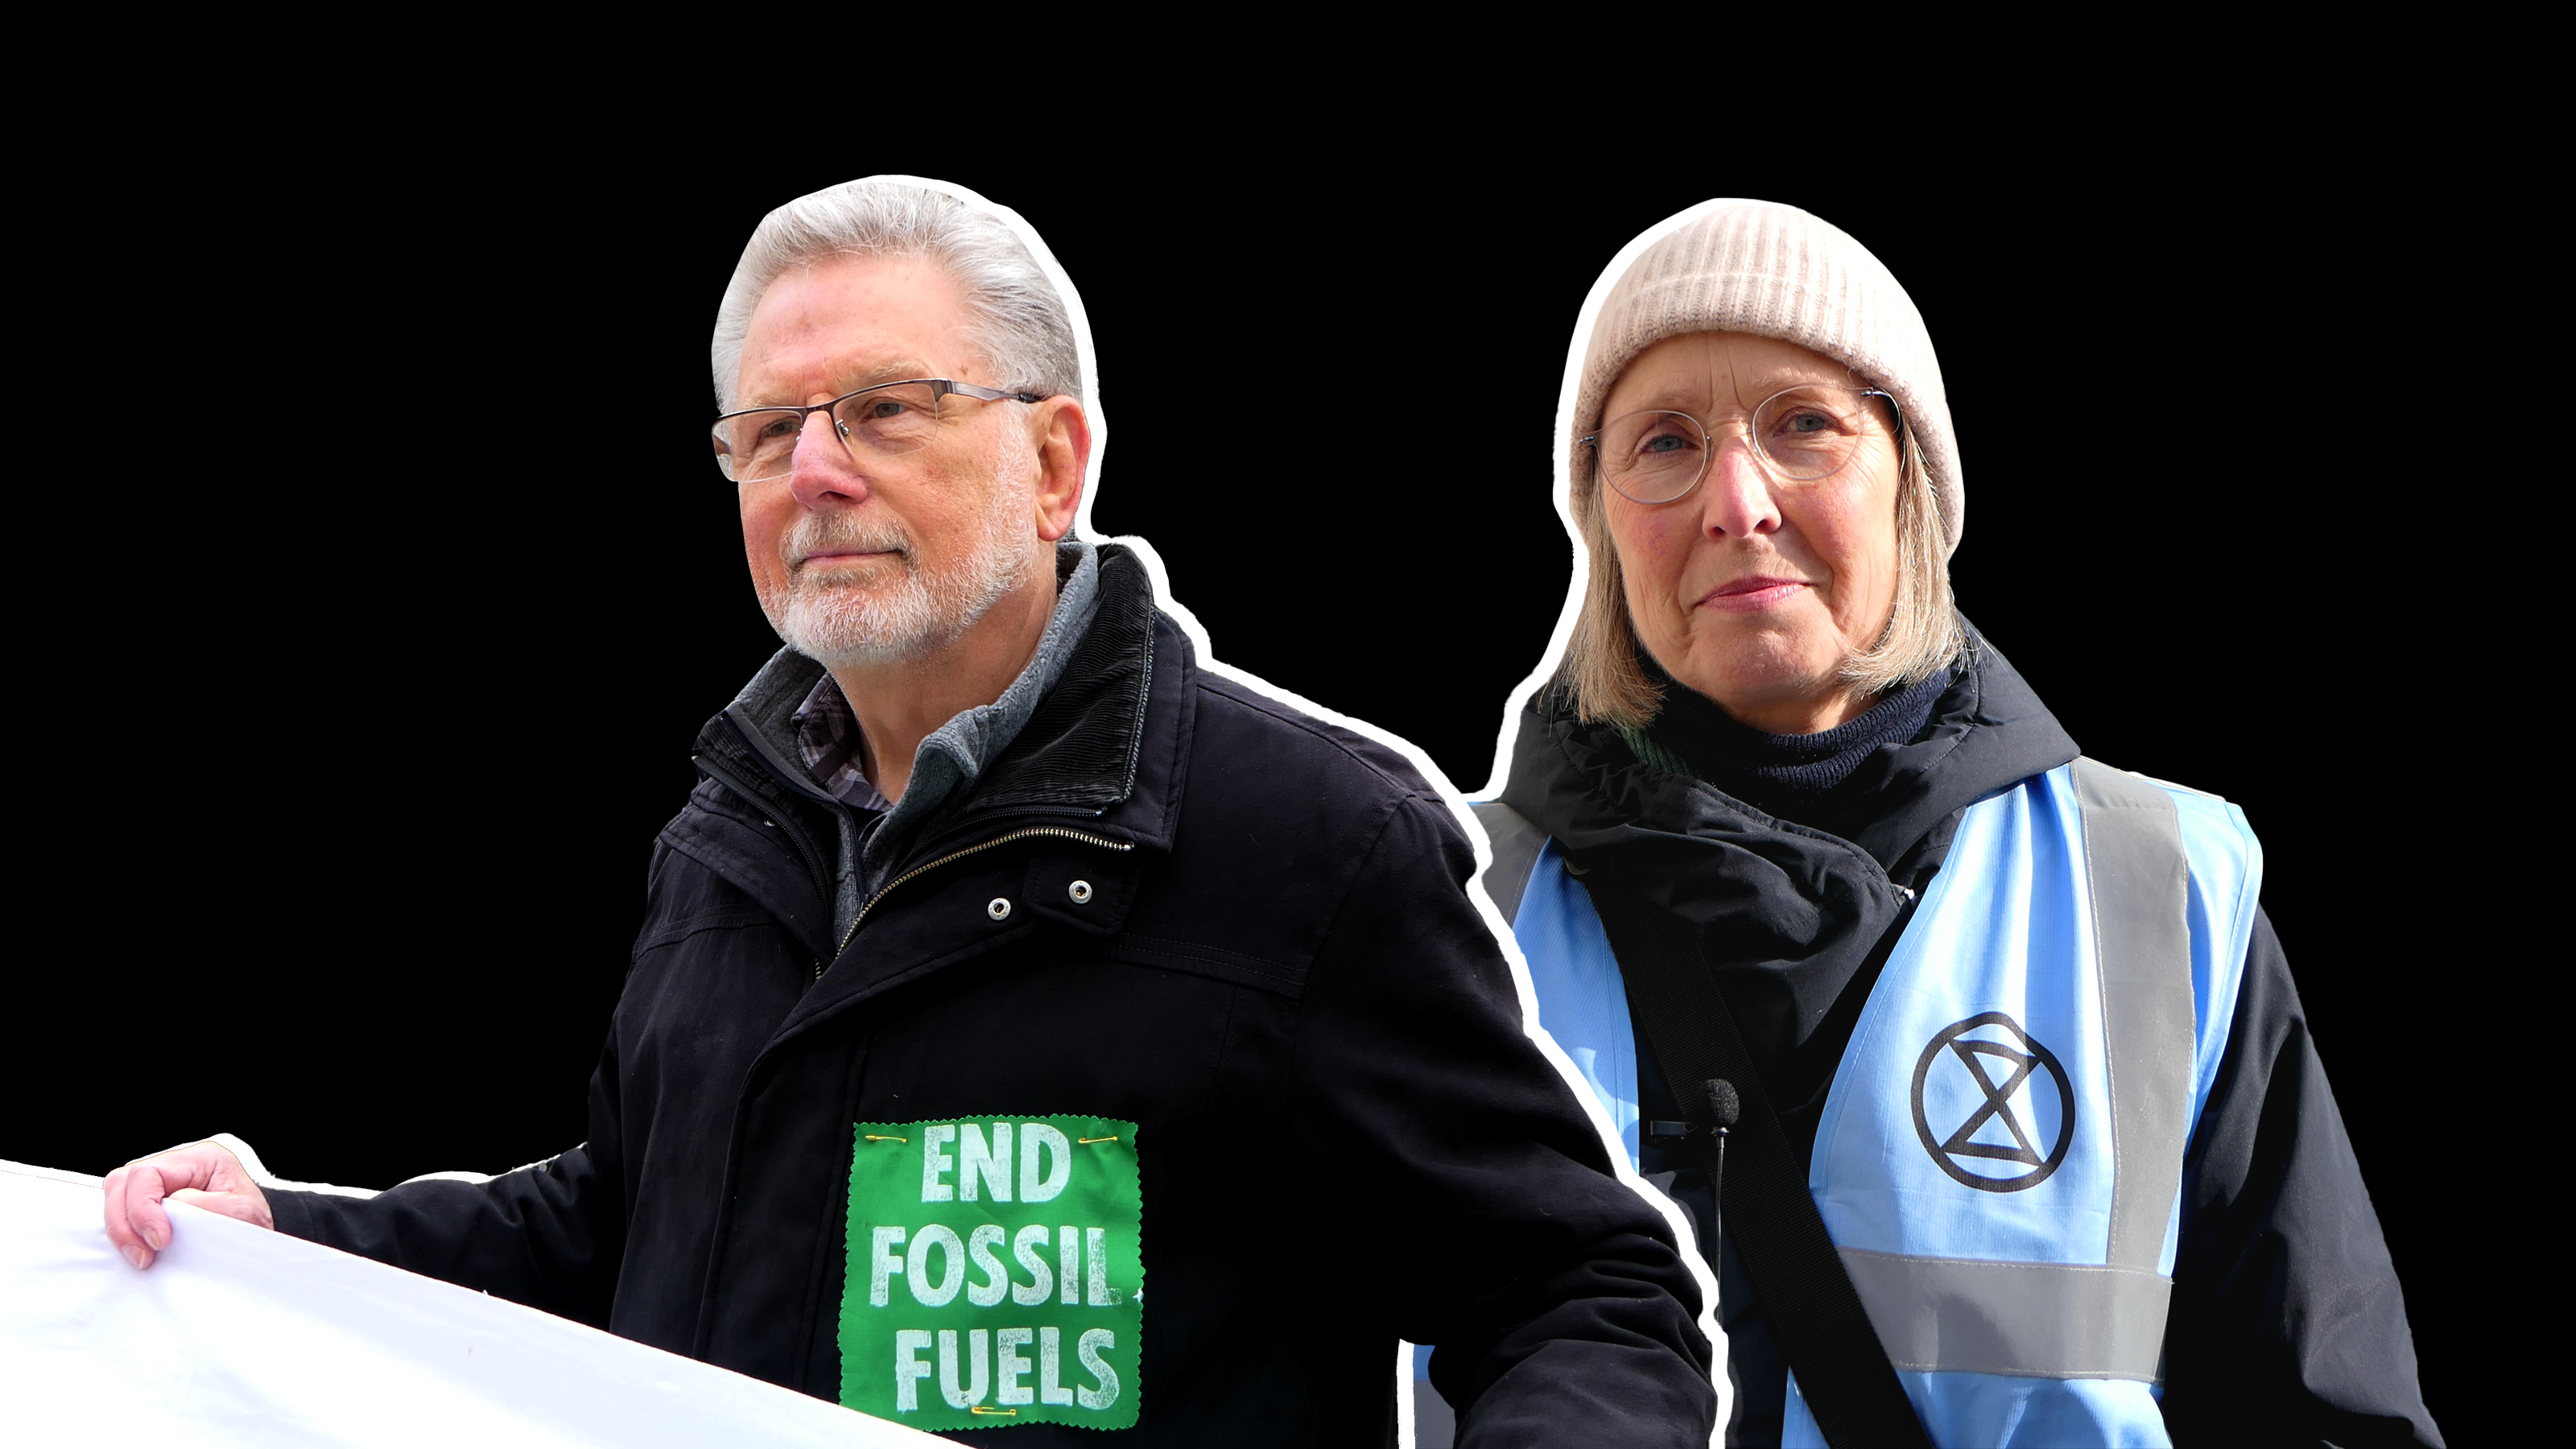 Cover Image for The senior climate activists mobilizing to protect their grandkids’ future